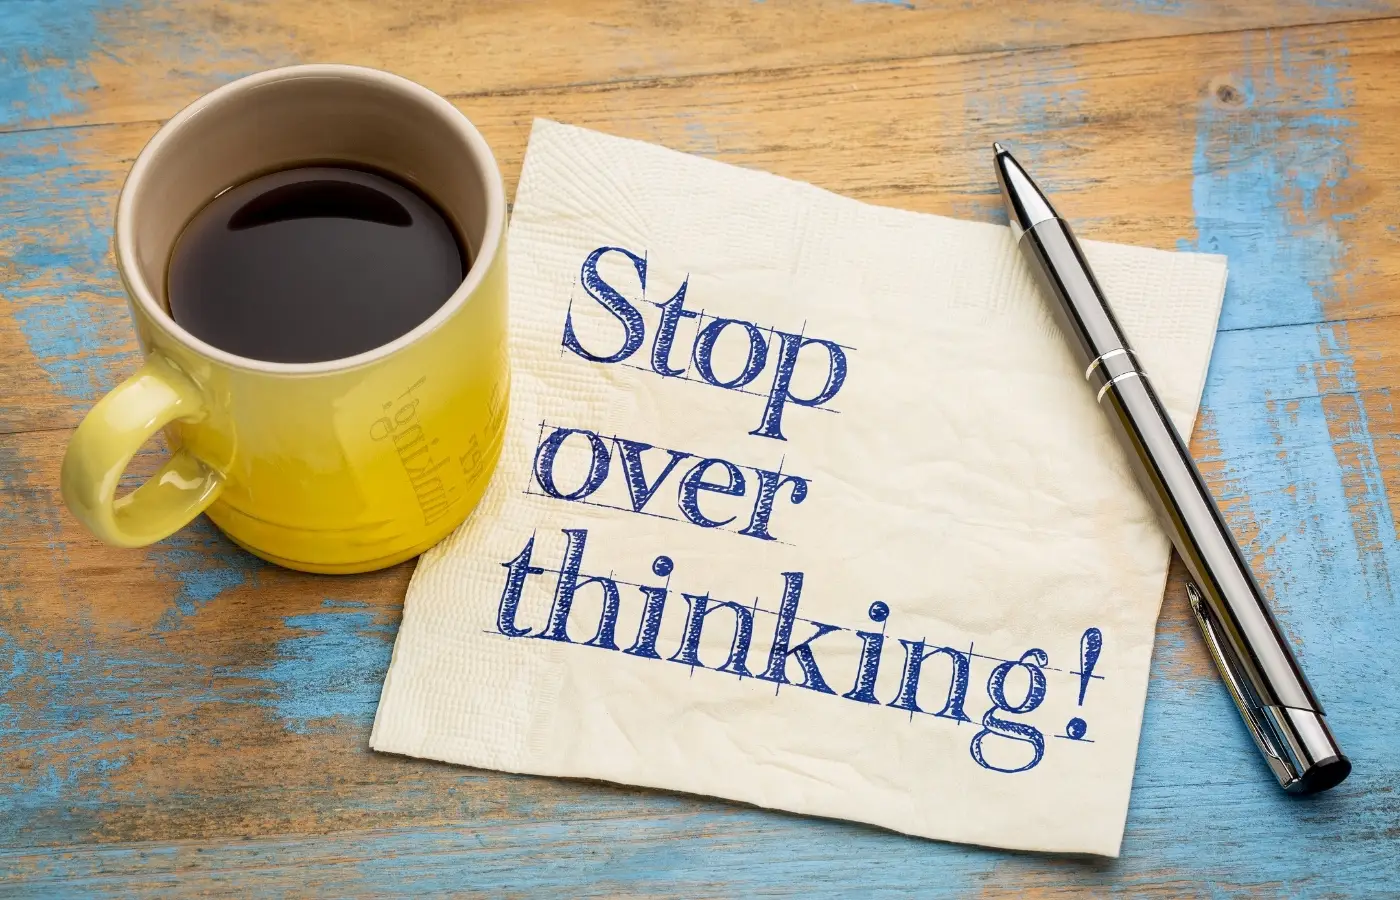 The text "How to stop overthinking" printed on a napkin sitting beneath a cup of coffee